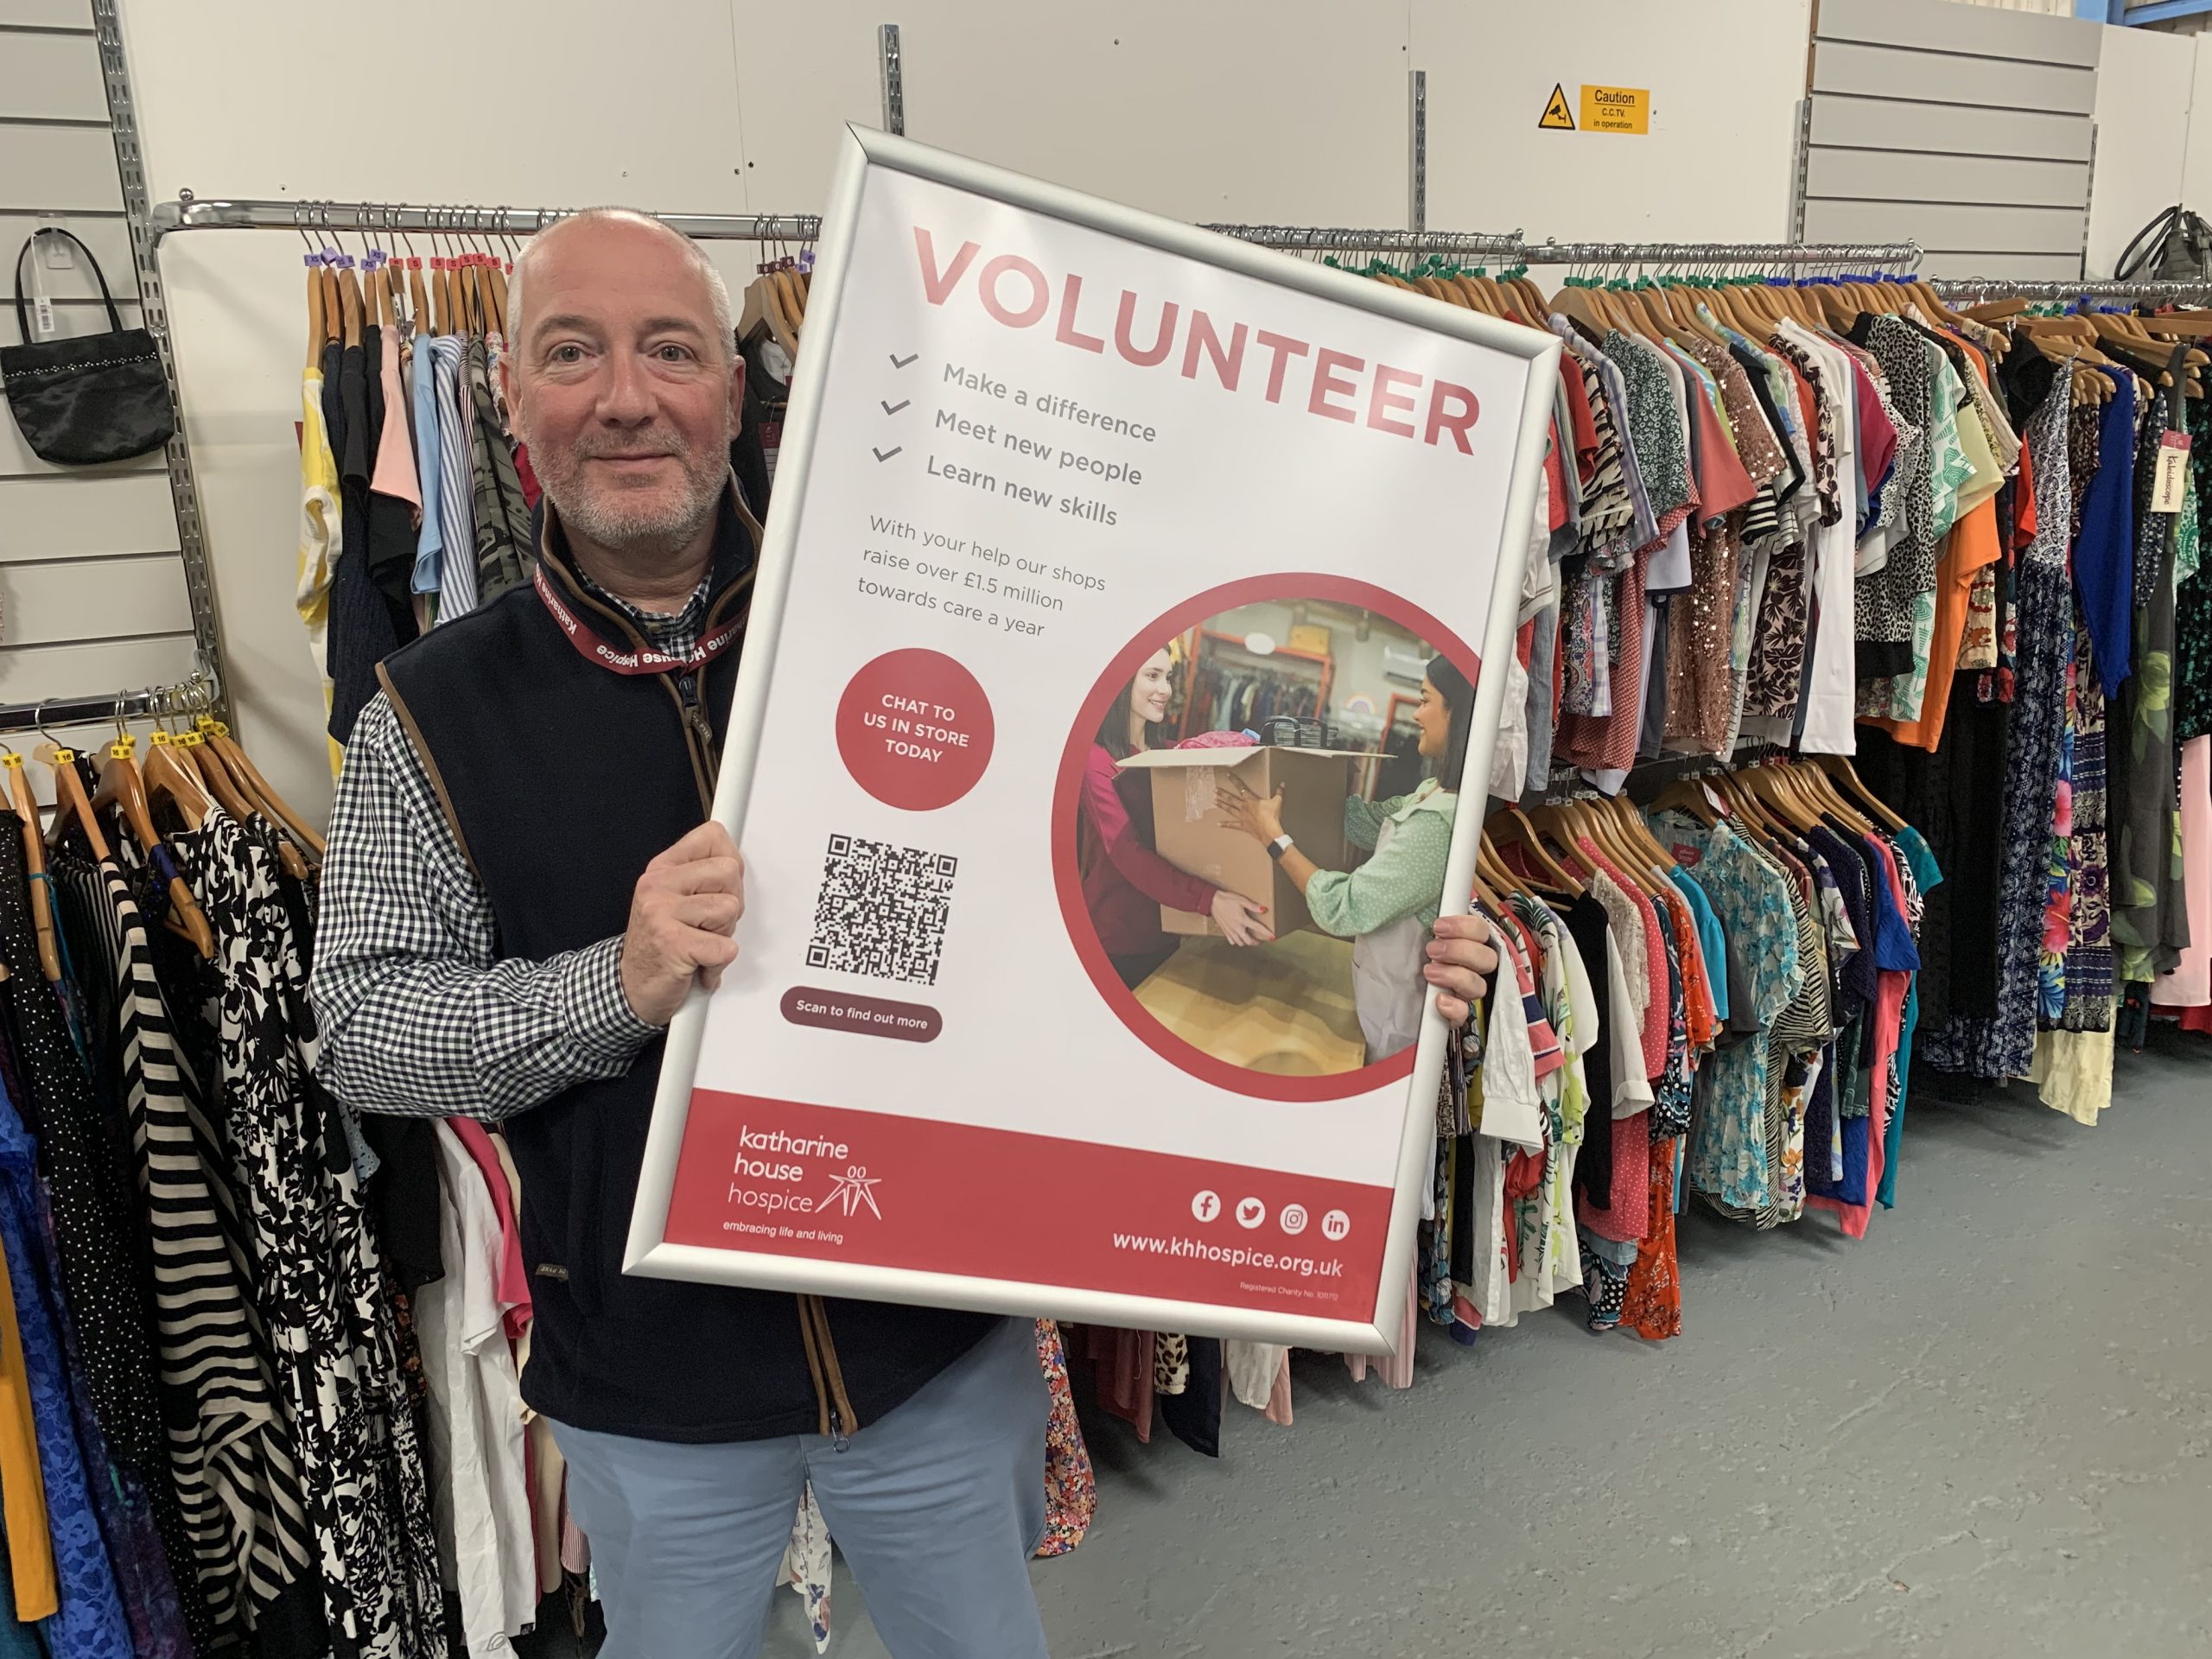 Retail Support Manager, Dave, holds up a volunteer poster.